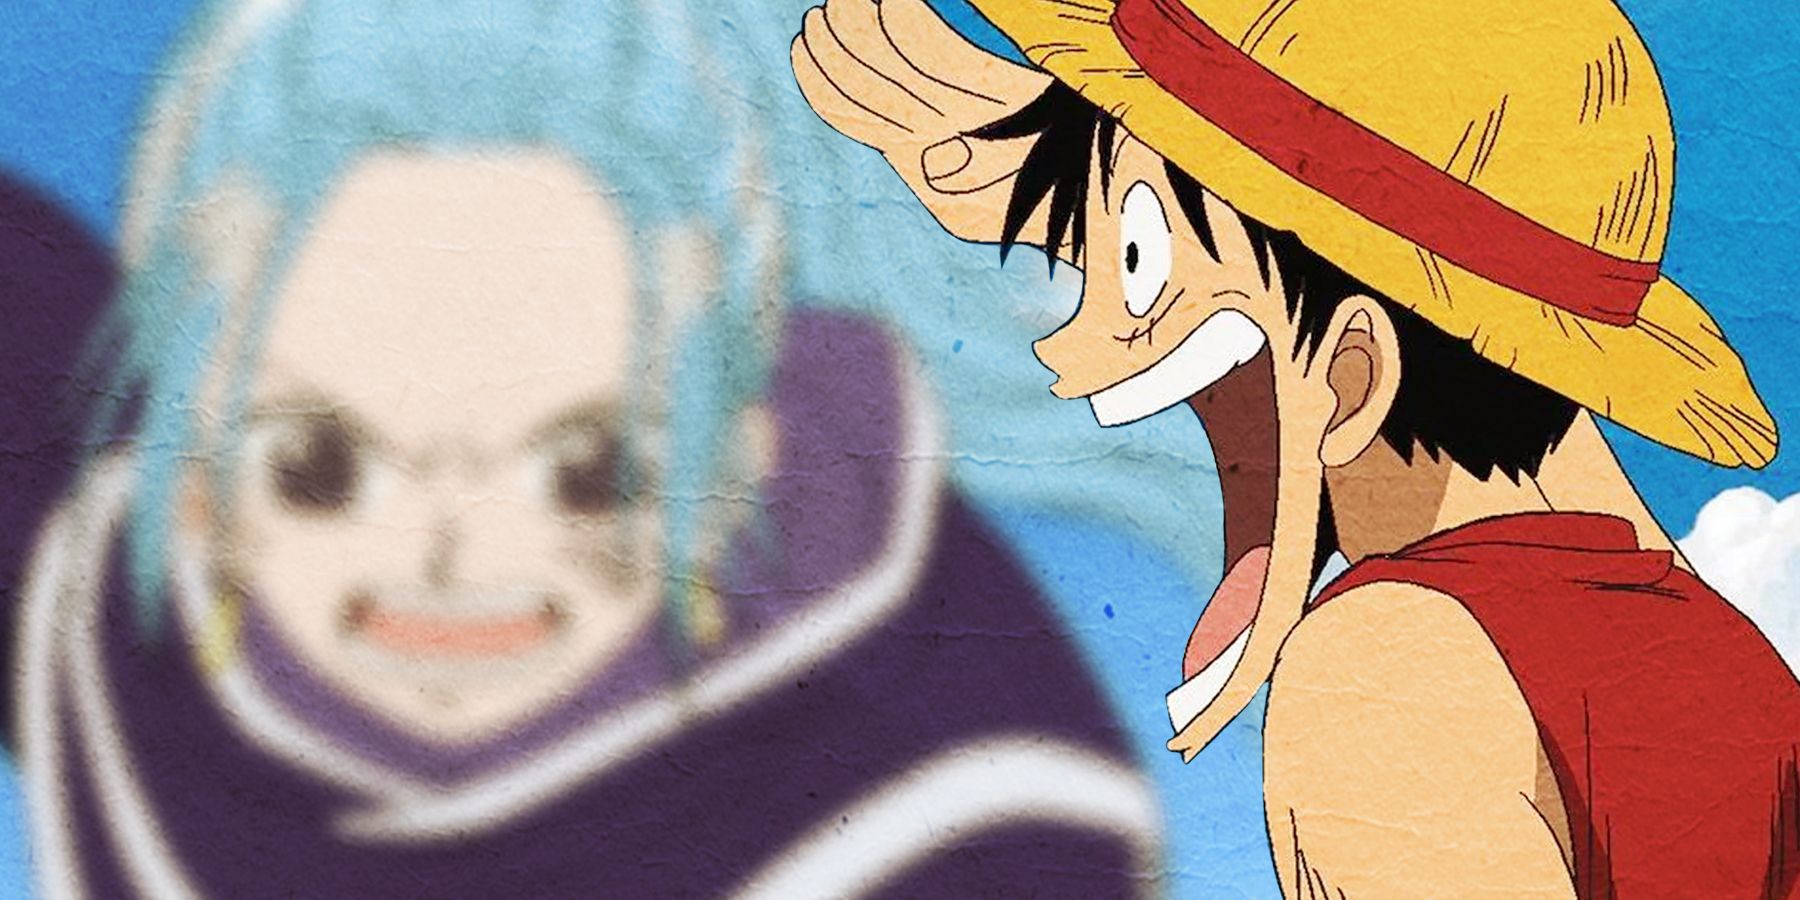 One Piece's Luffy in the foreground and Vivi fighting in the background